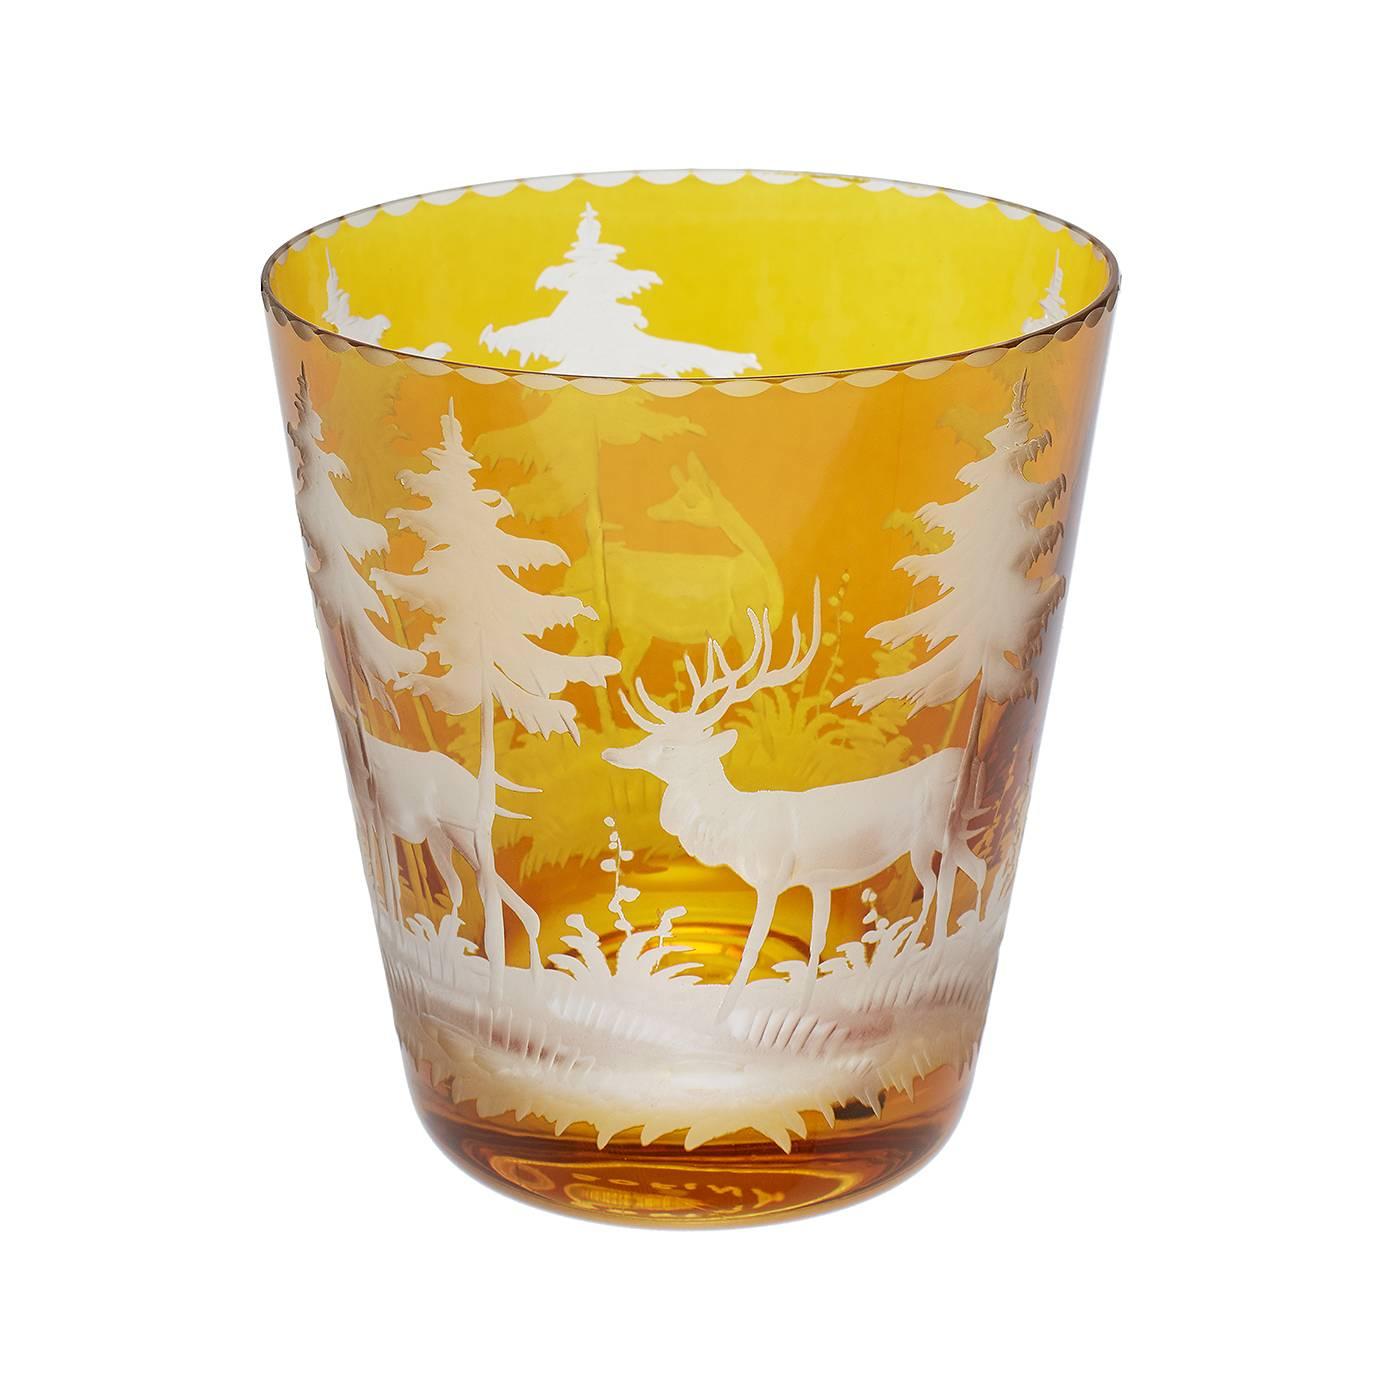 Set of six handblown amber crystal tumblers with hand-edged hunting scene in the style of Black forest. The decor is an antique hunting scene decor with deers, trees and bambis all around. Completely handblown and hand-engraved in Bavaria Germany.